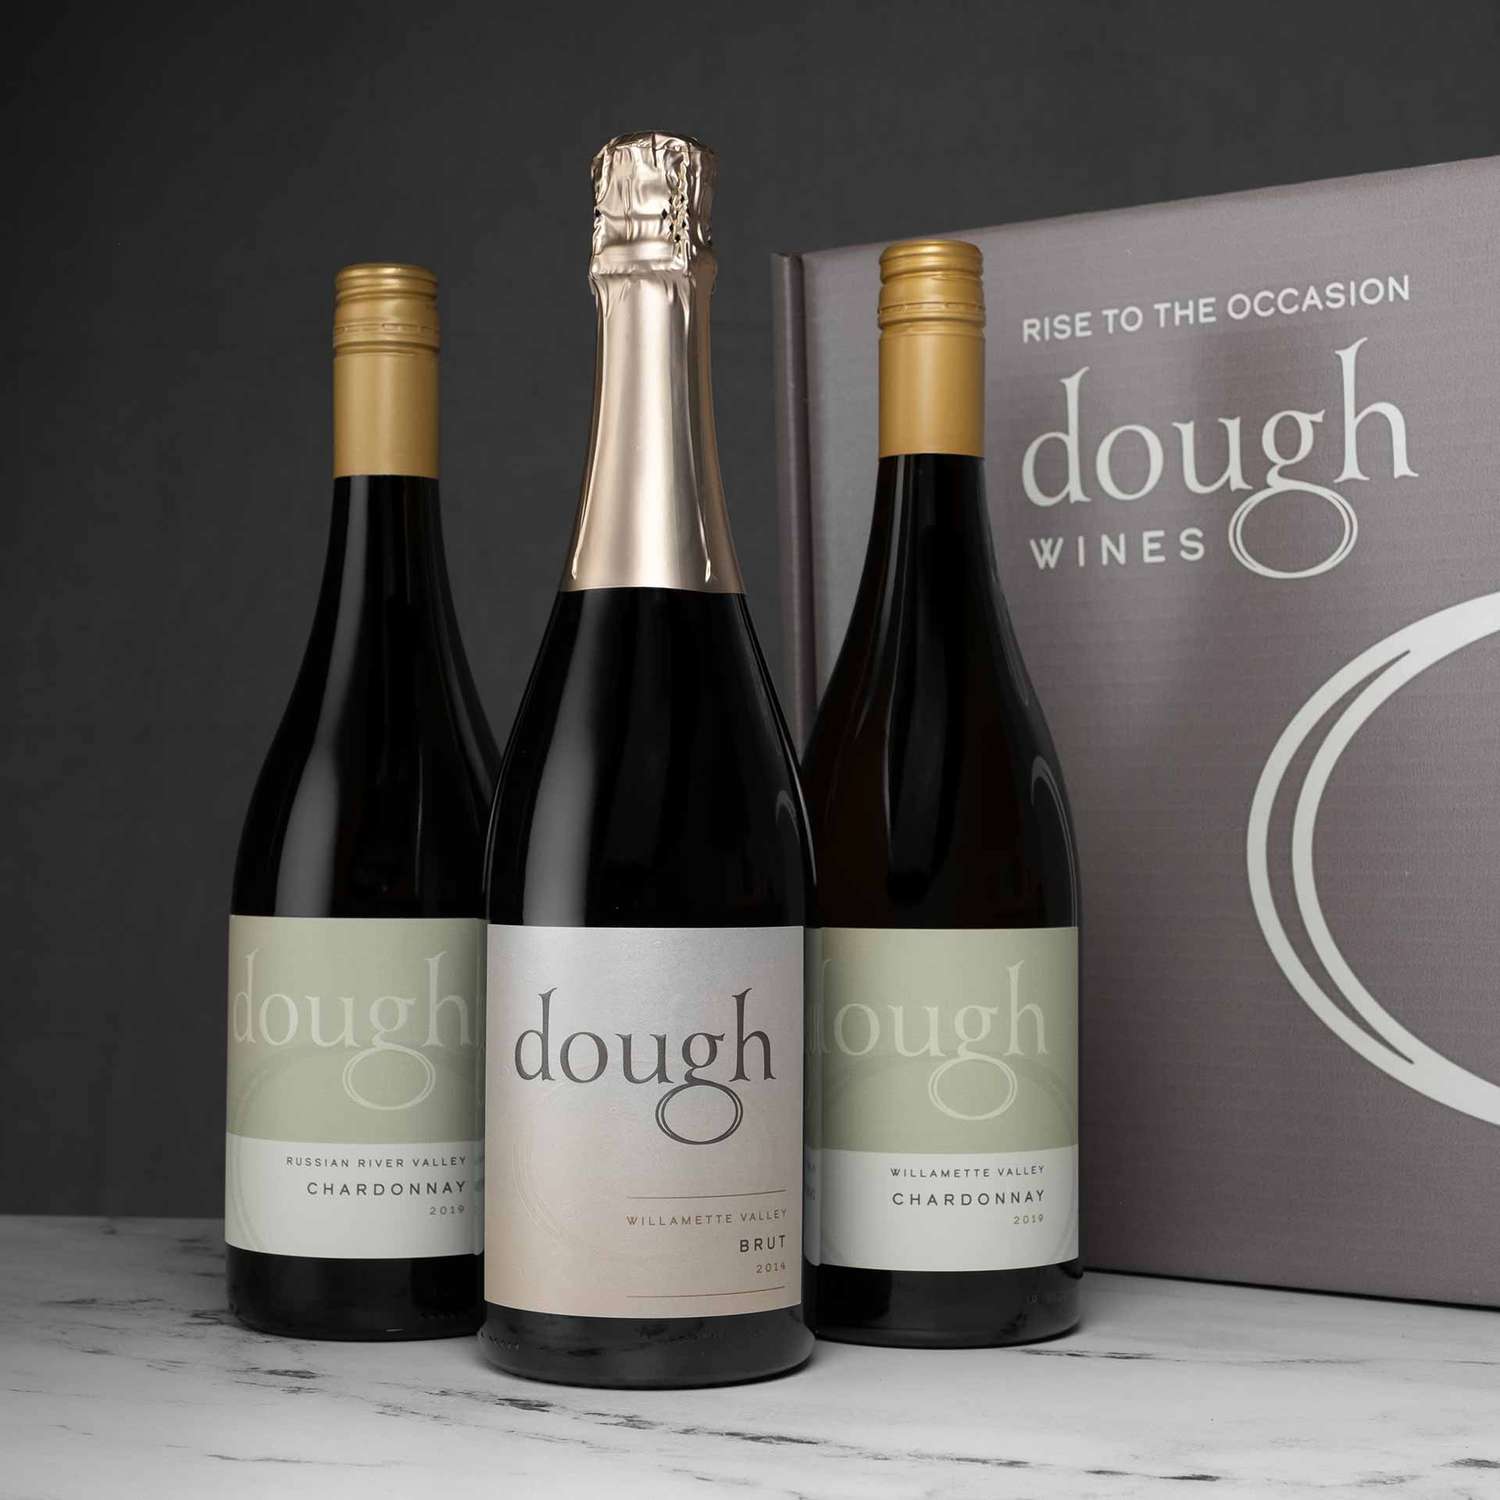 Dough Wines Expressions of Chardonnay